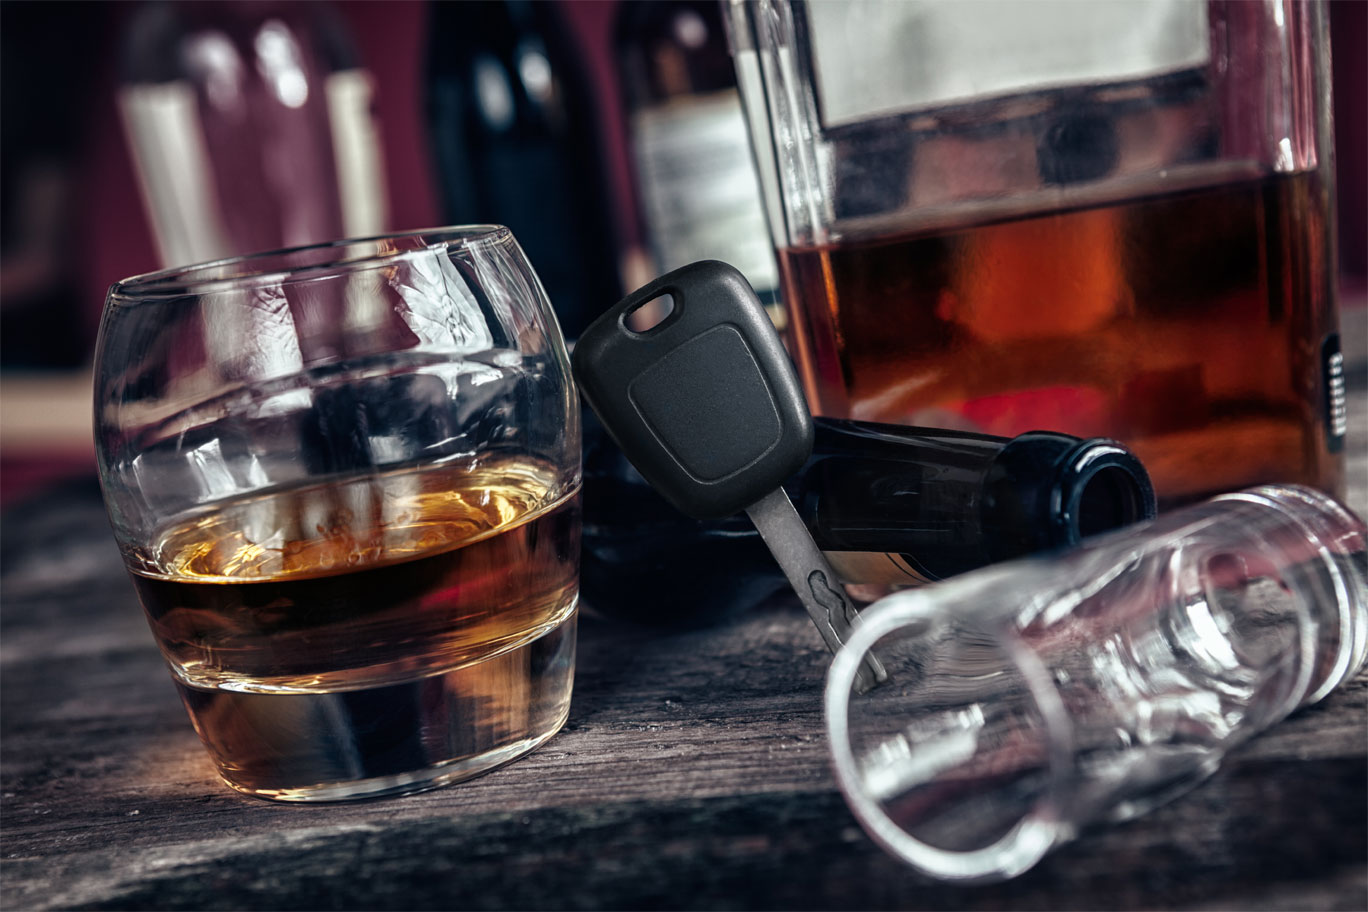 A glass of alcohol and car keys on a table, insinuating arrest for DUI.